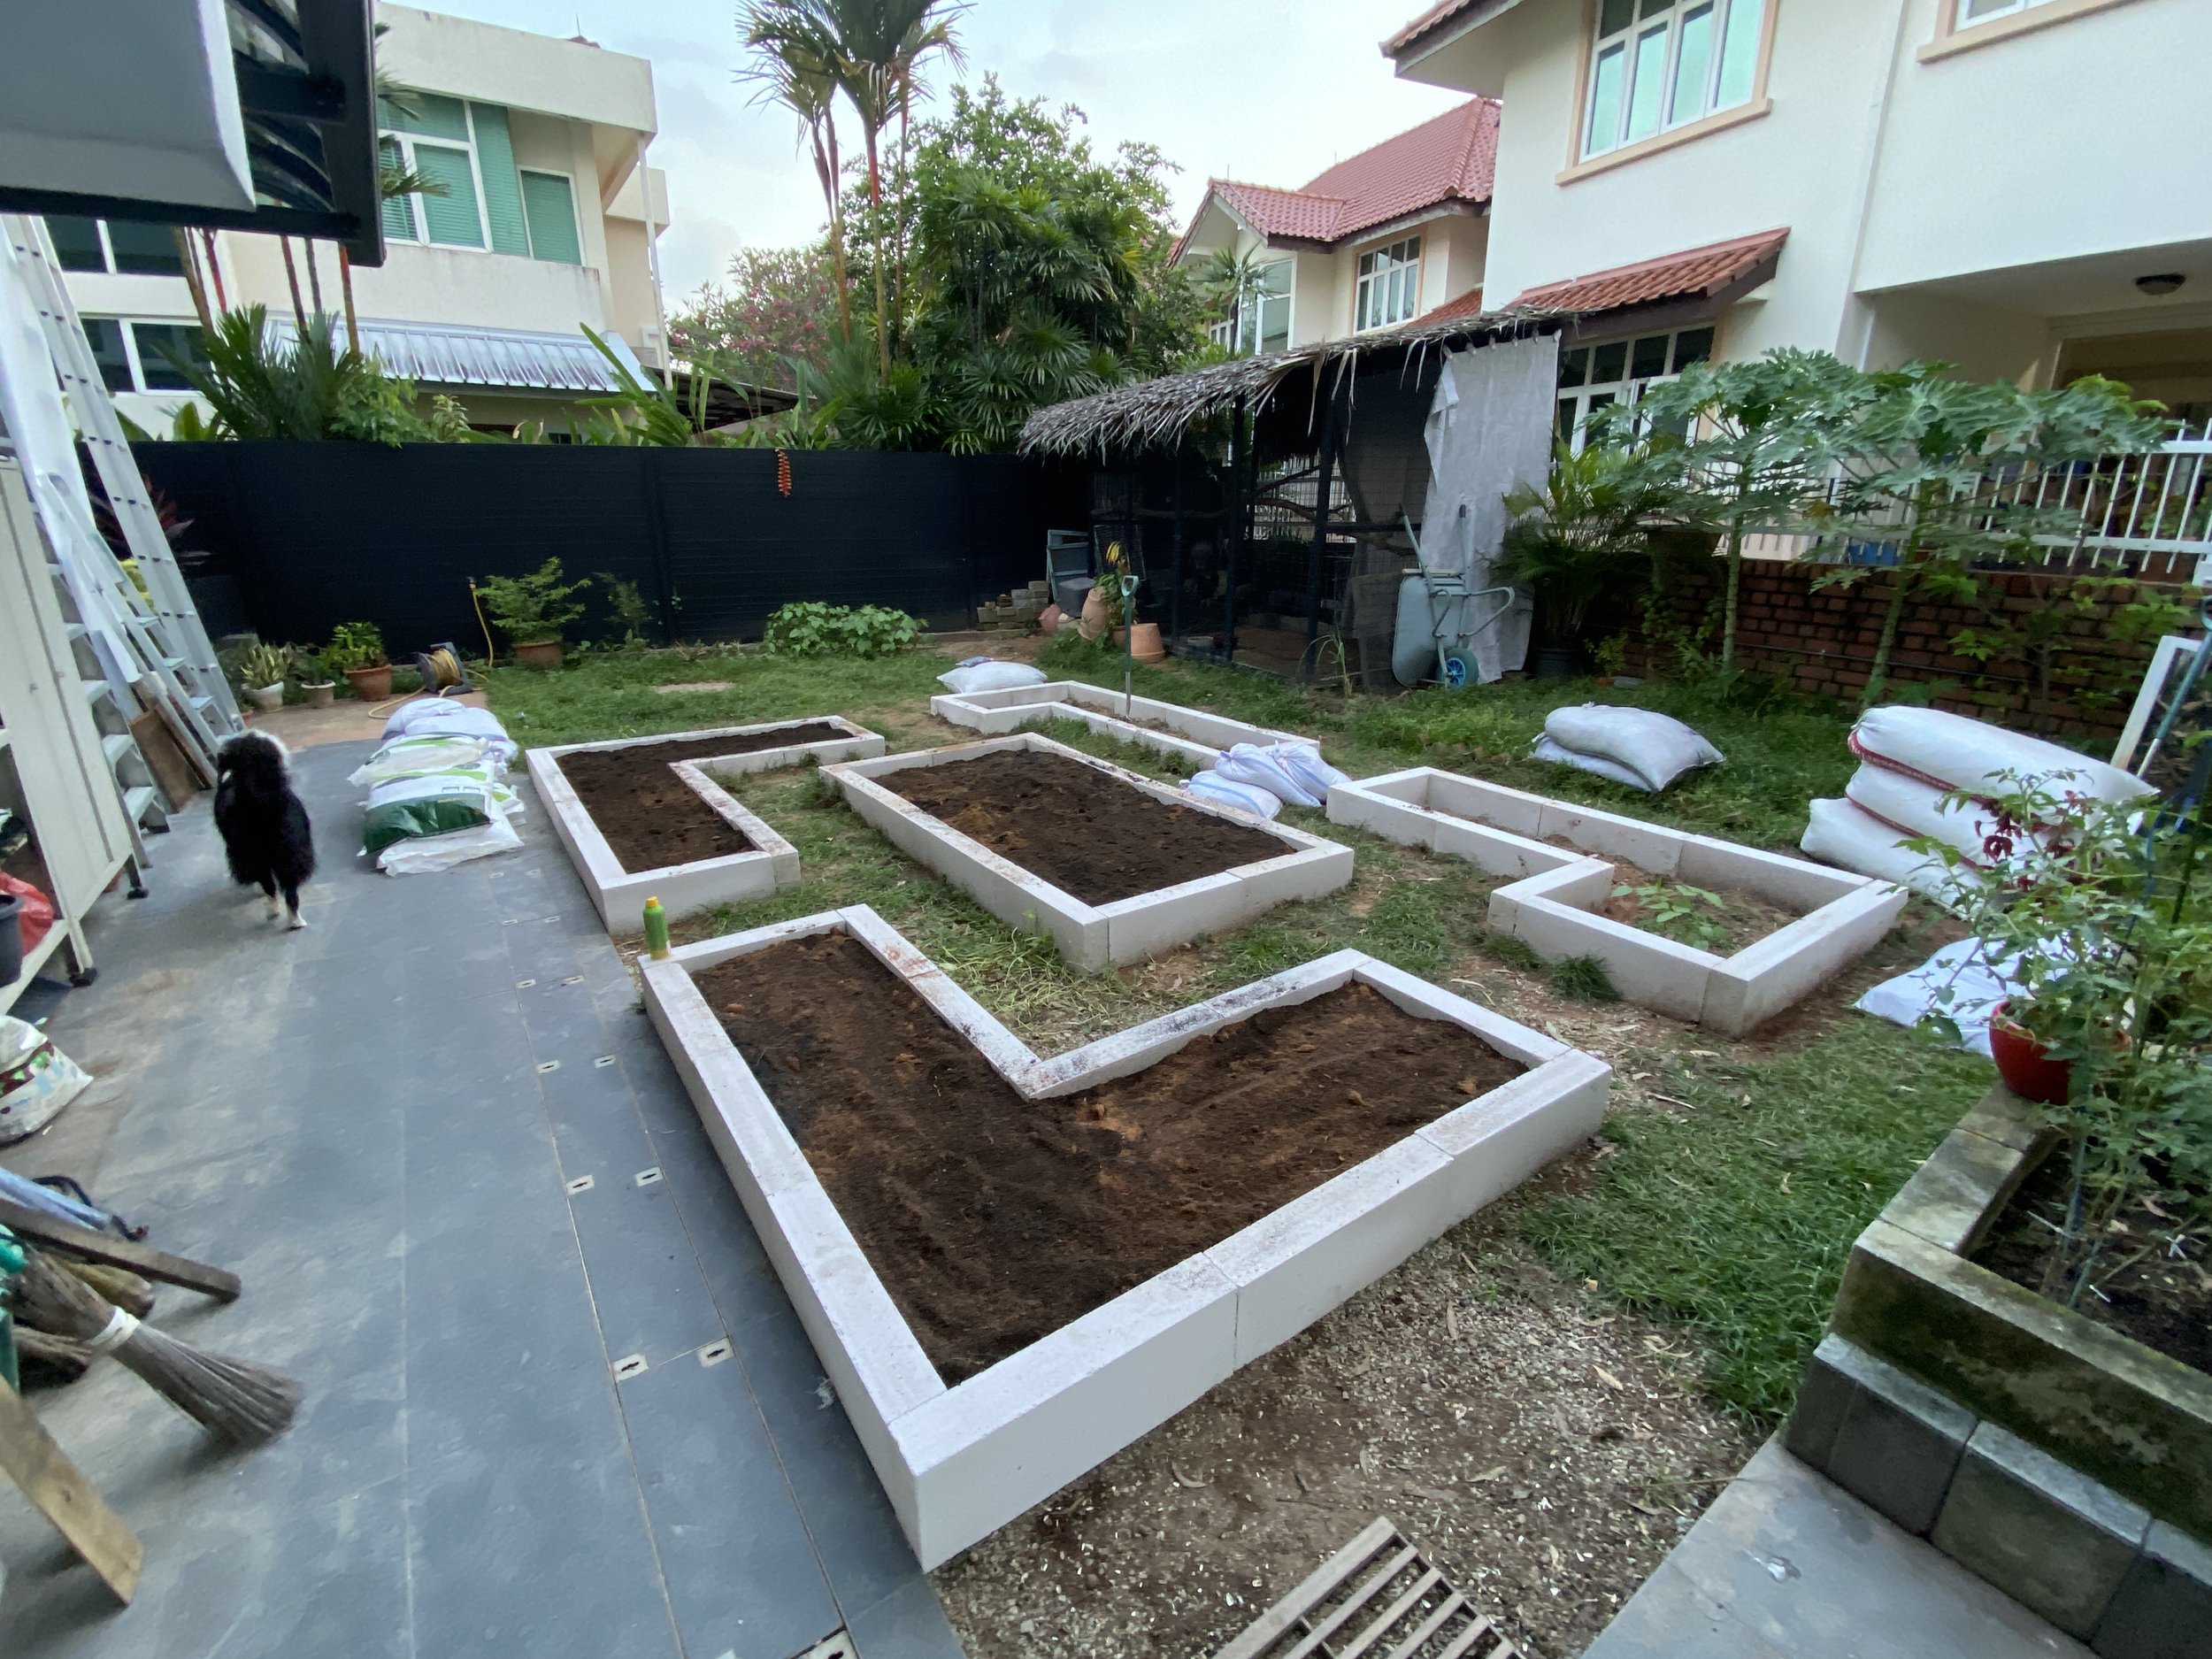 Addition of soil